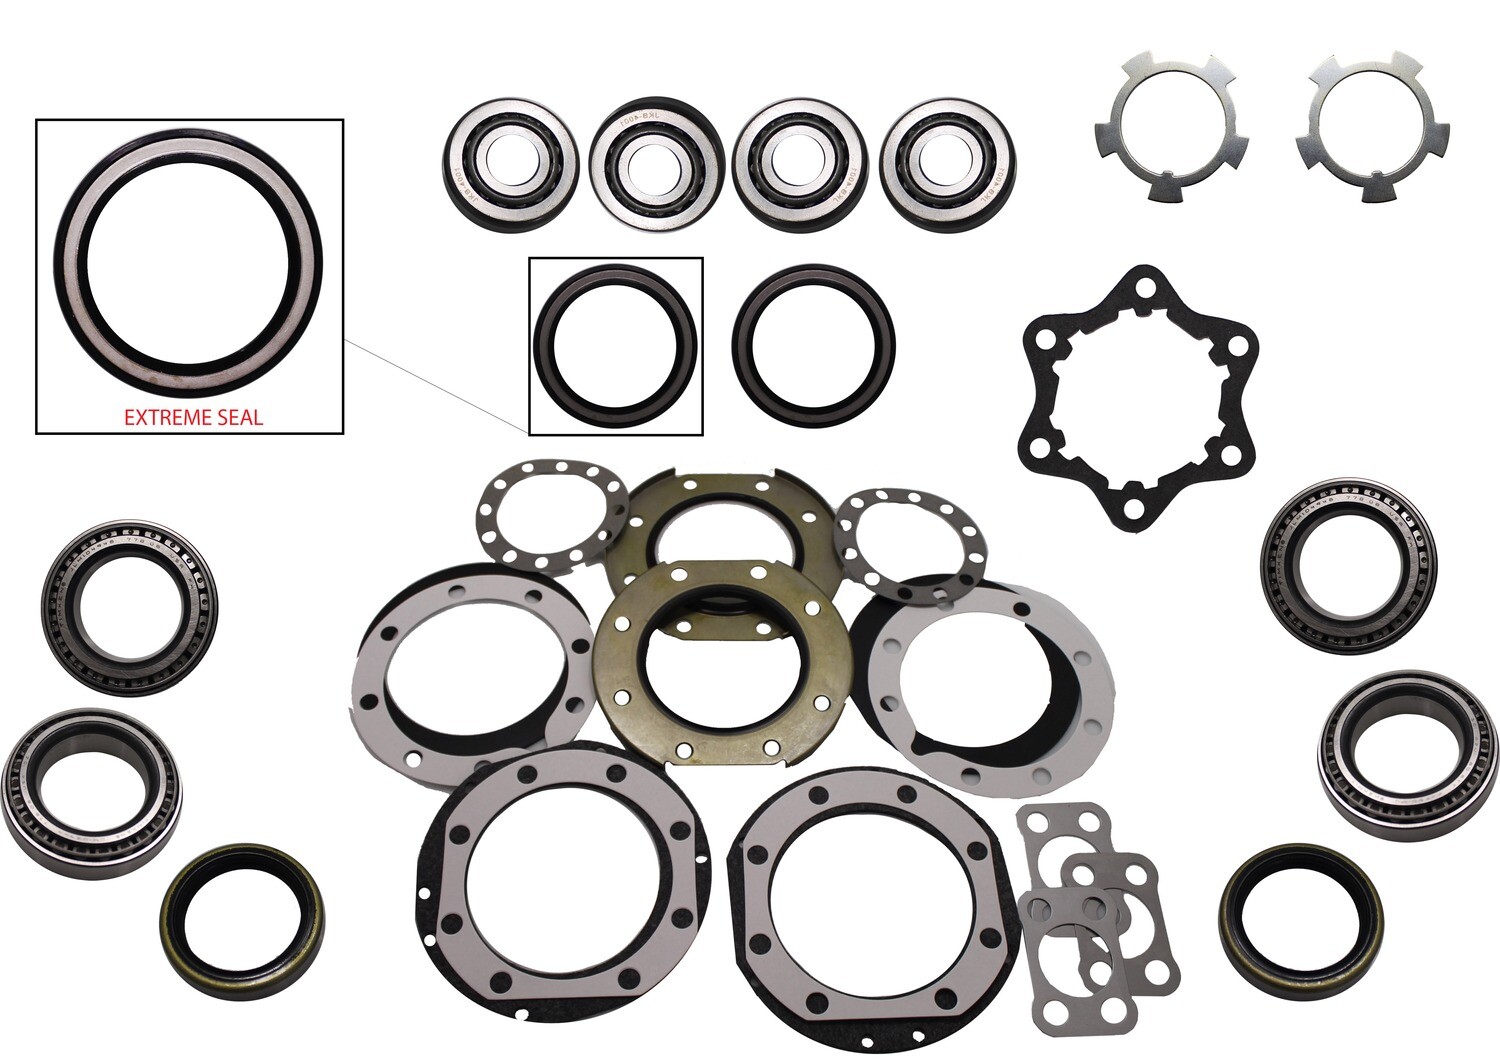 SWIVEL HUB KIT INC. WHEEL BEARINGS SUIT TOYOTA LANDCRUISER 40/50/60 SERIES TOYOTA HILUX SOLID AXLE FRONT UP TO 1997